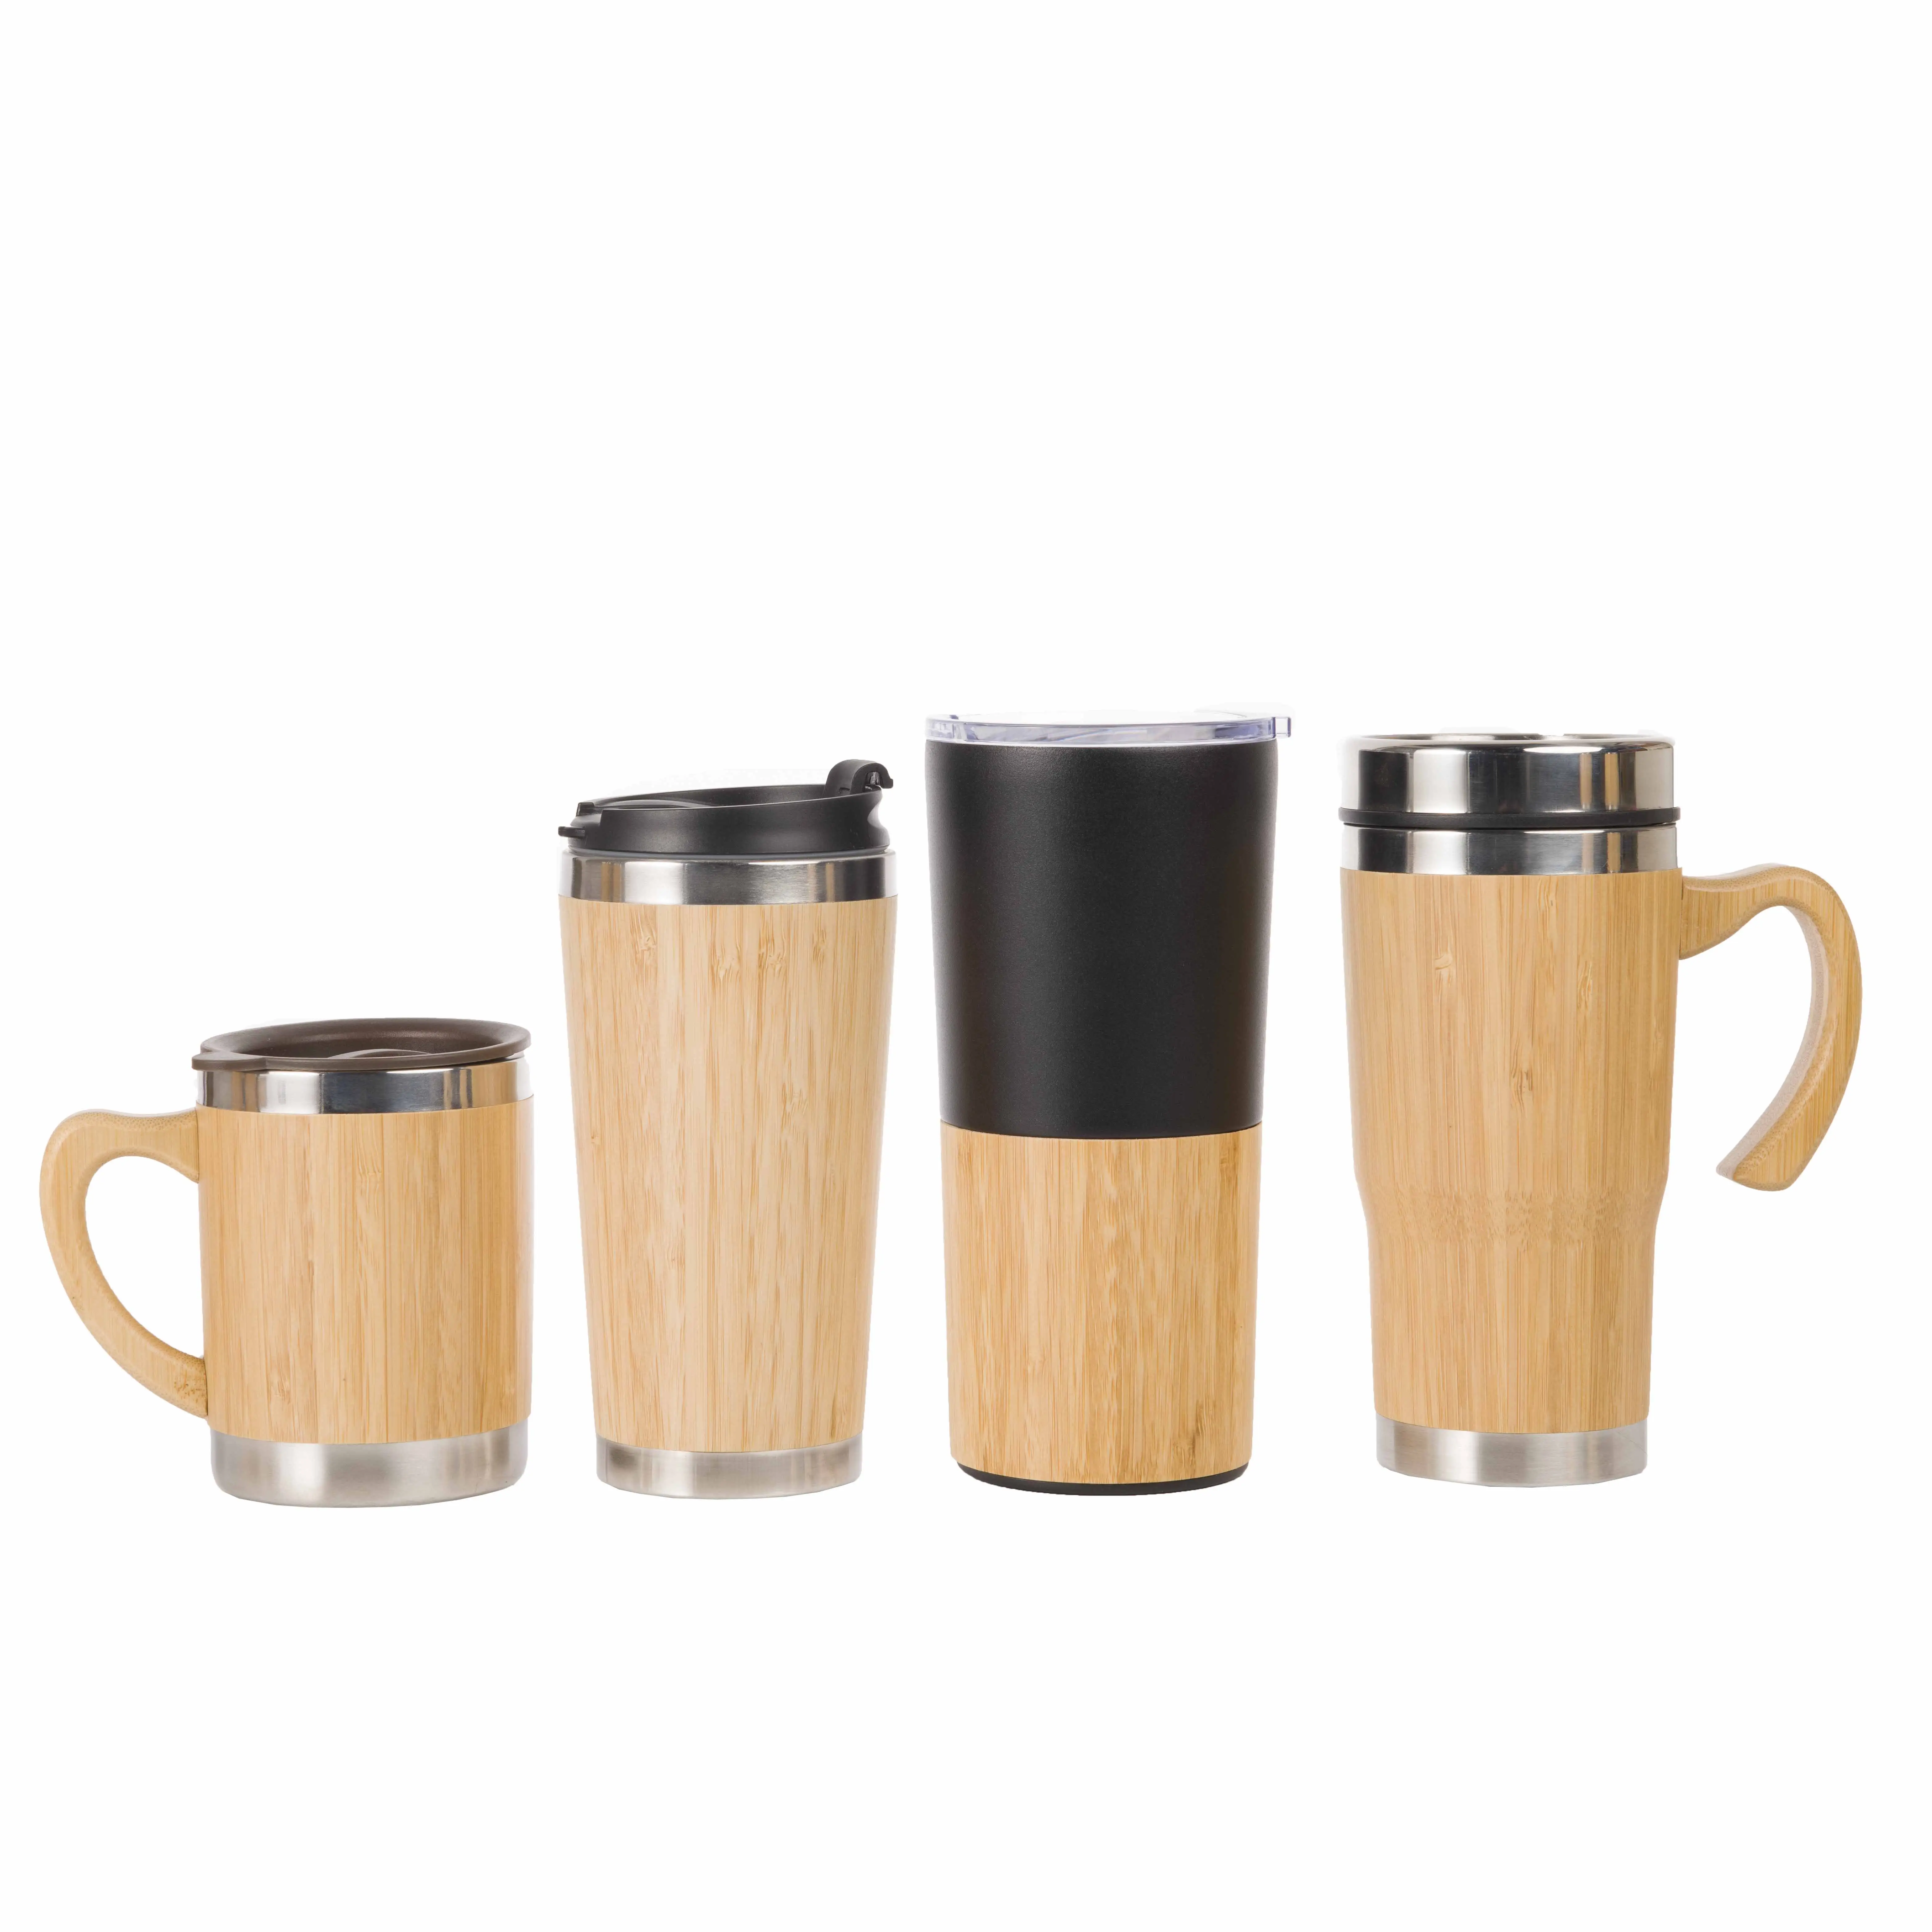 NXF customize water bottle double wall coffee mug vacuum thermos stainless steel tumbler cups with bamboo